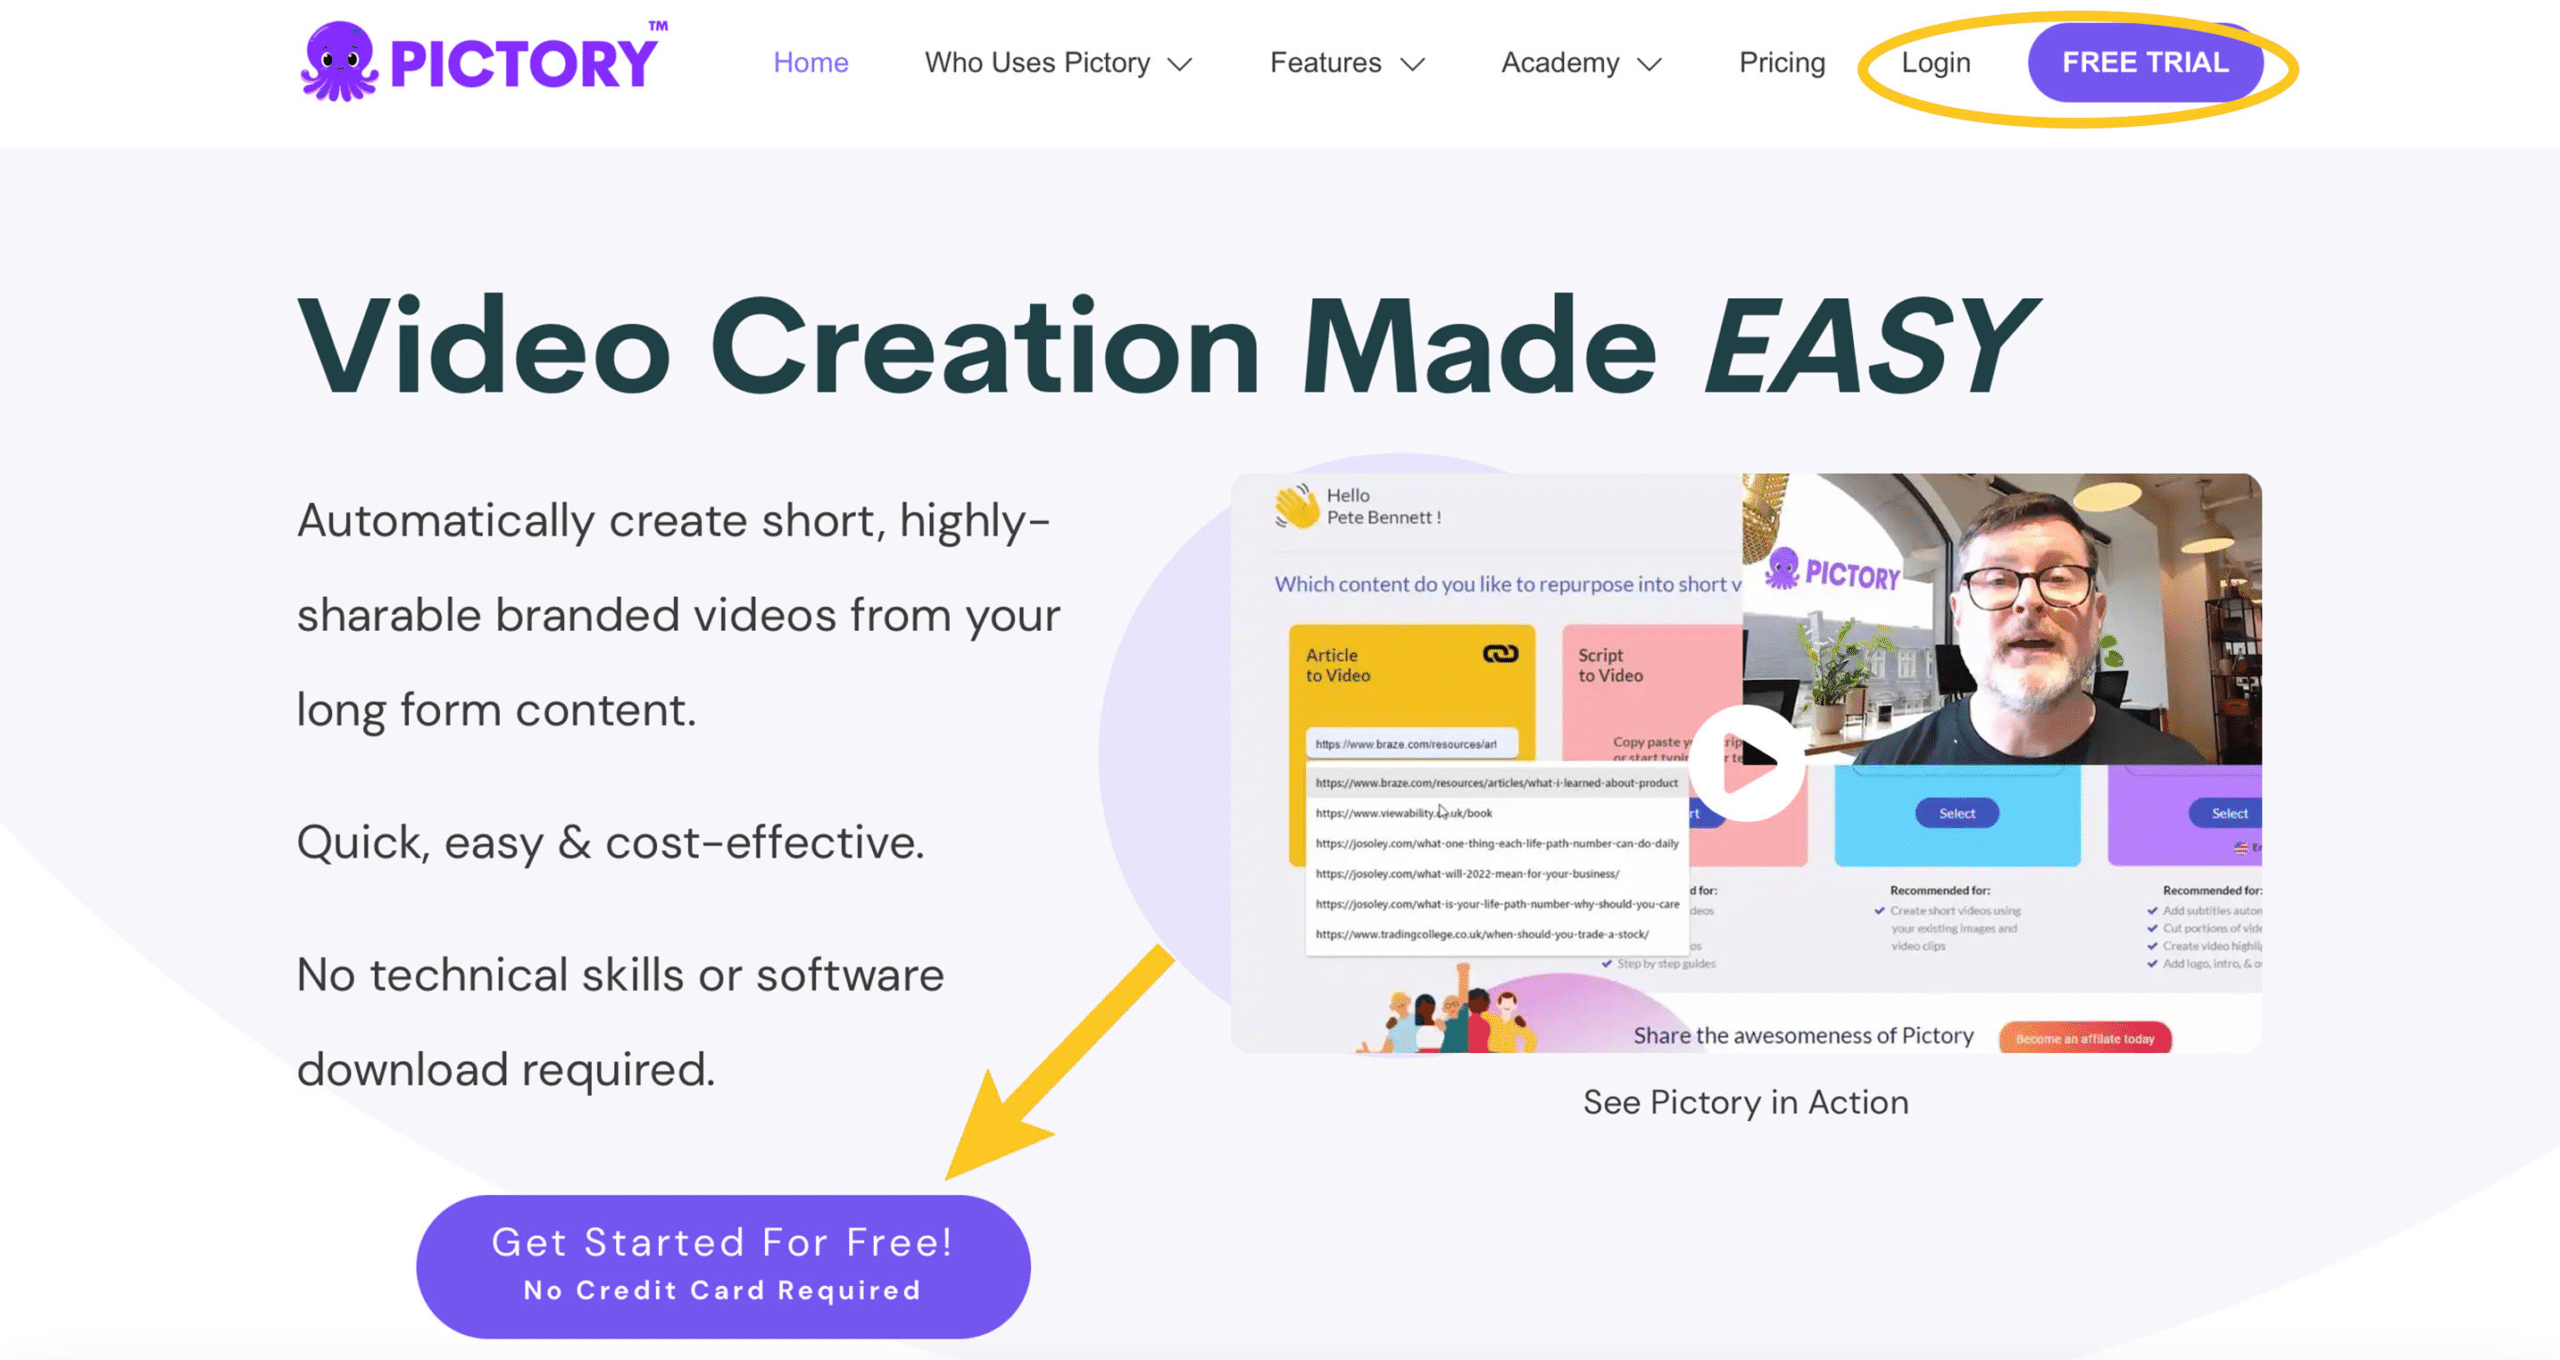 Begin by signing up for Pictory